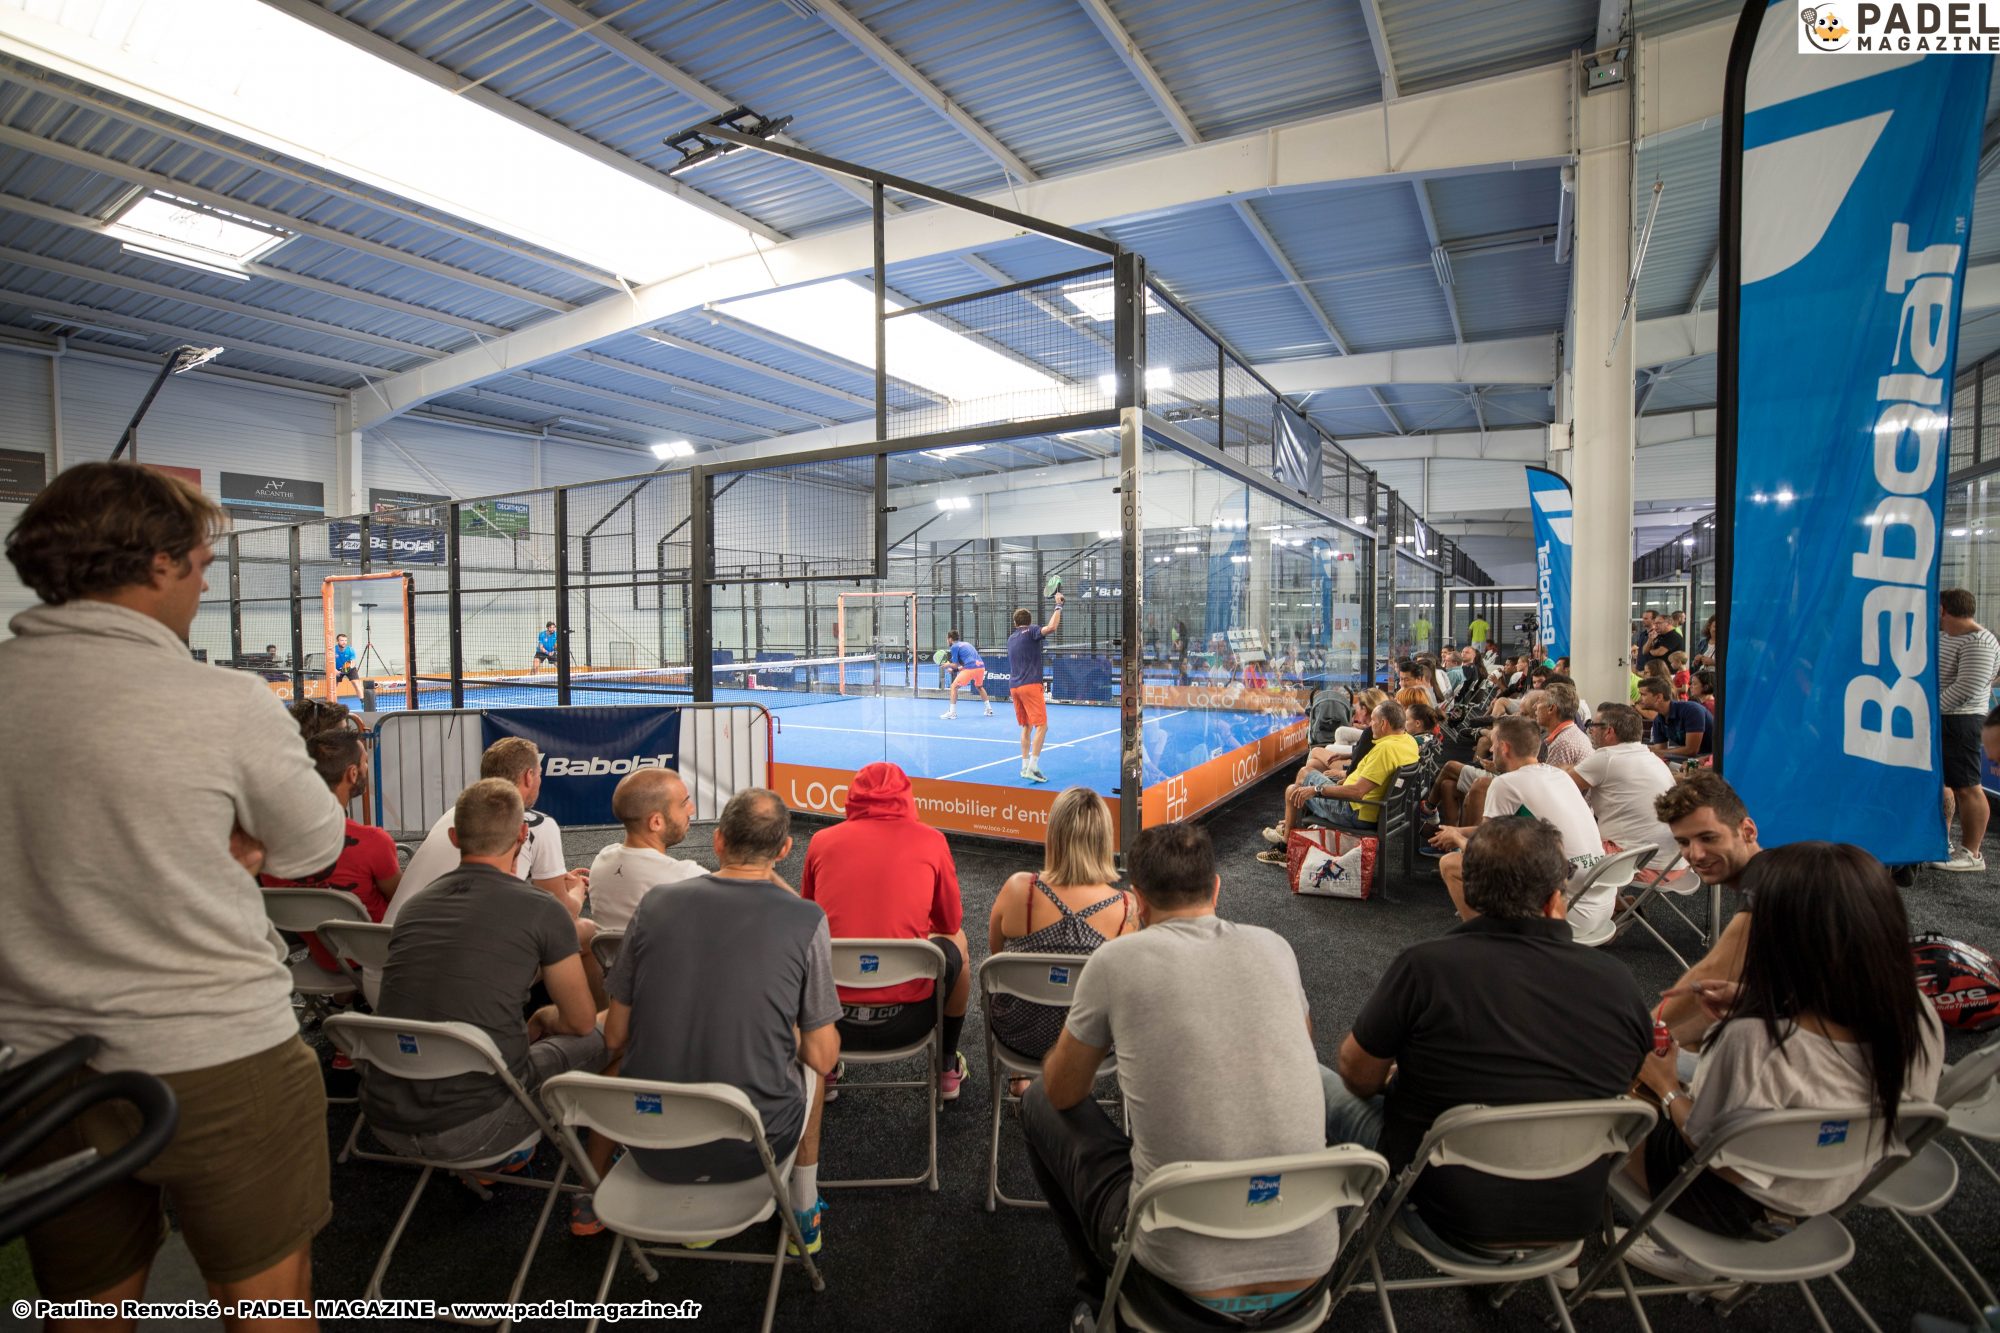 Finals - Programs and schedules - French Championships padel 2018